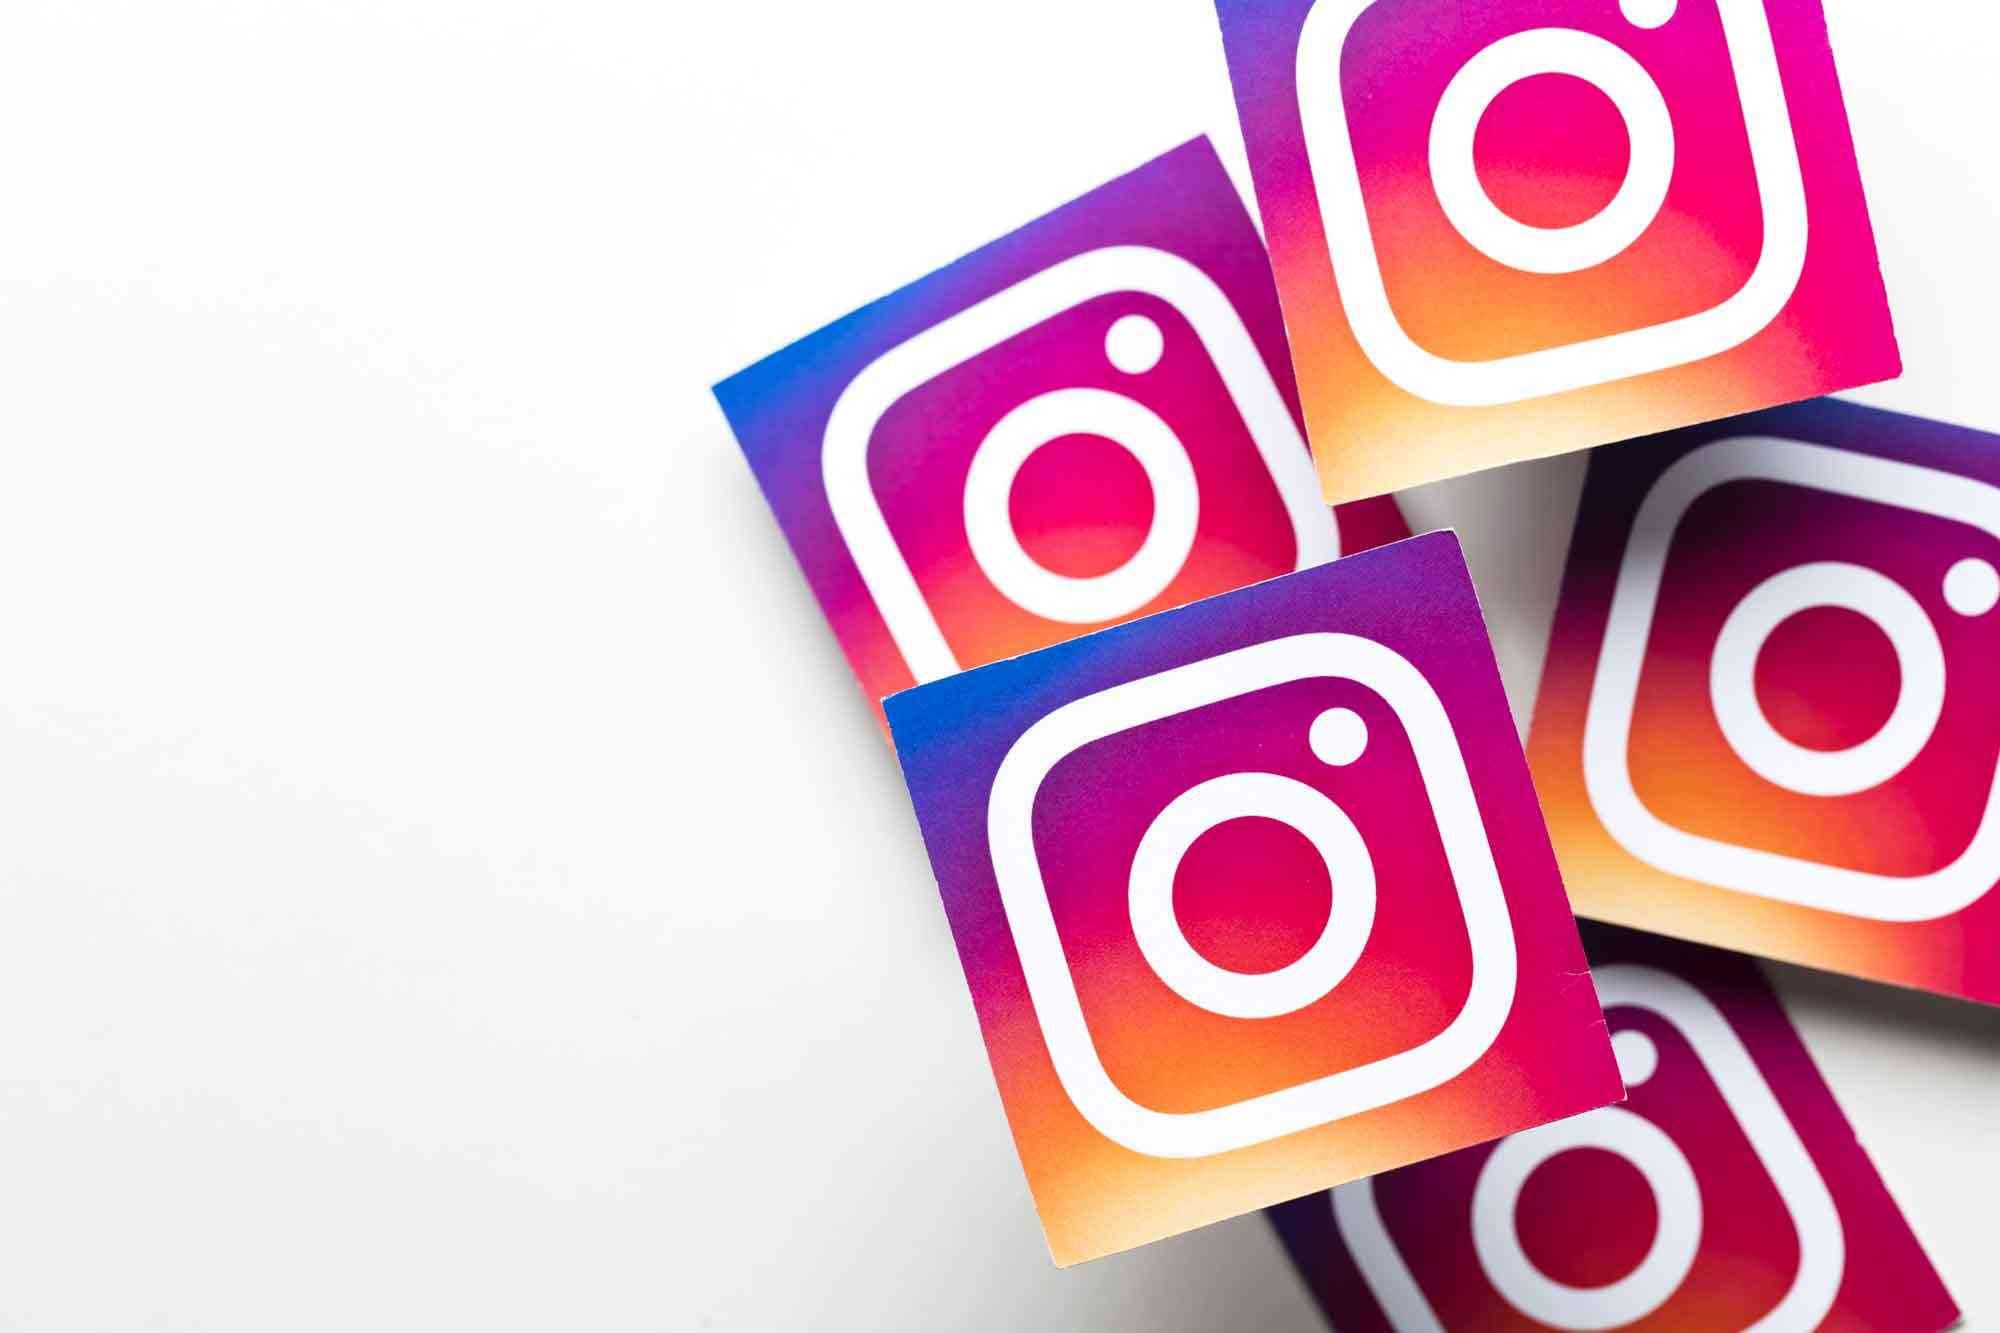 Instagram visit profile and its impact on followers' decision-making: how to optimize our content?